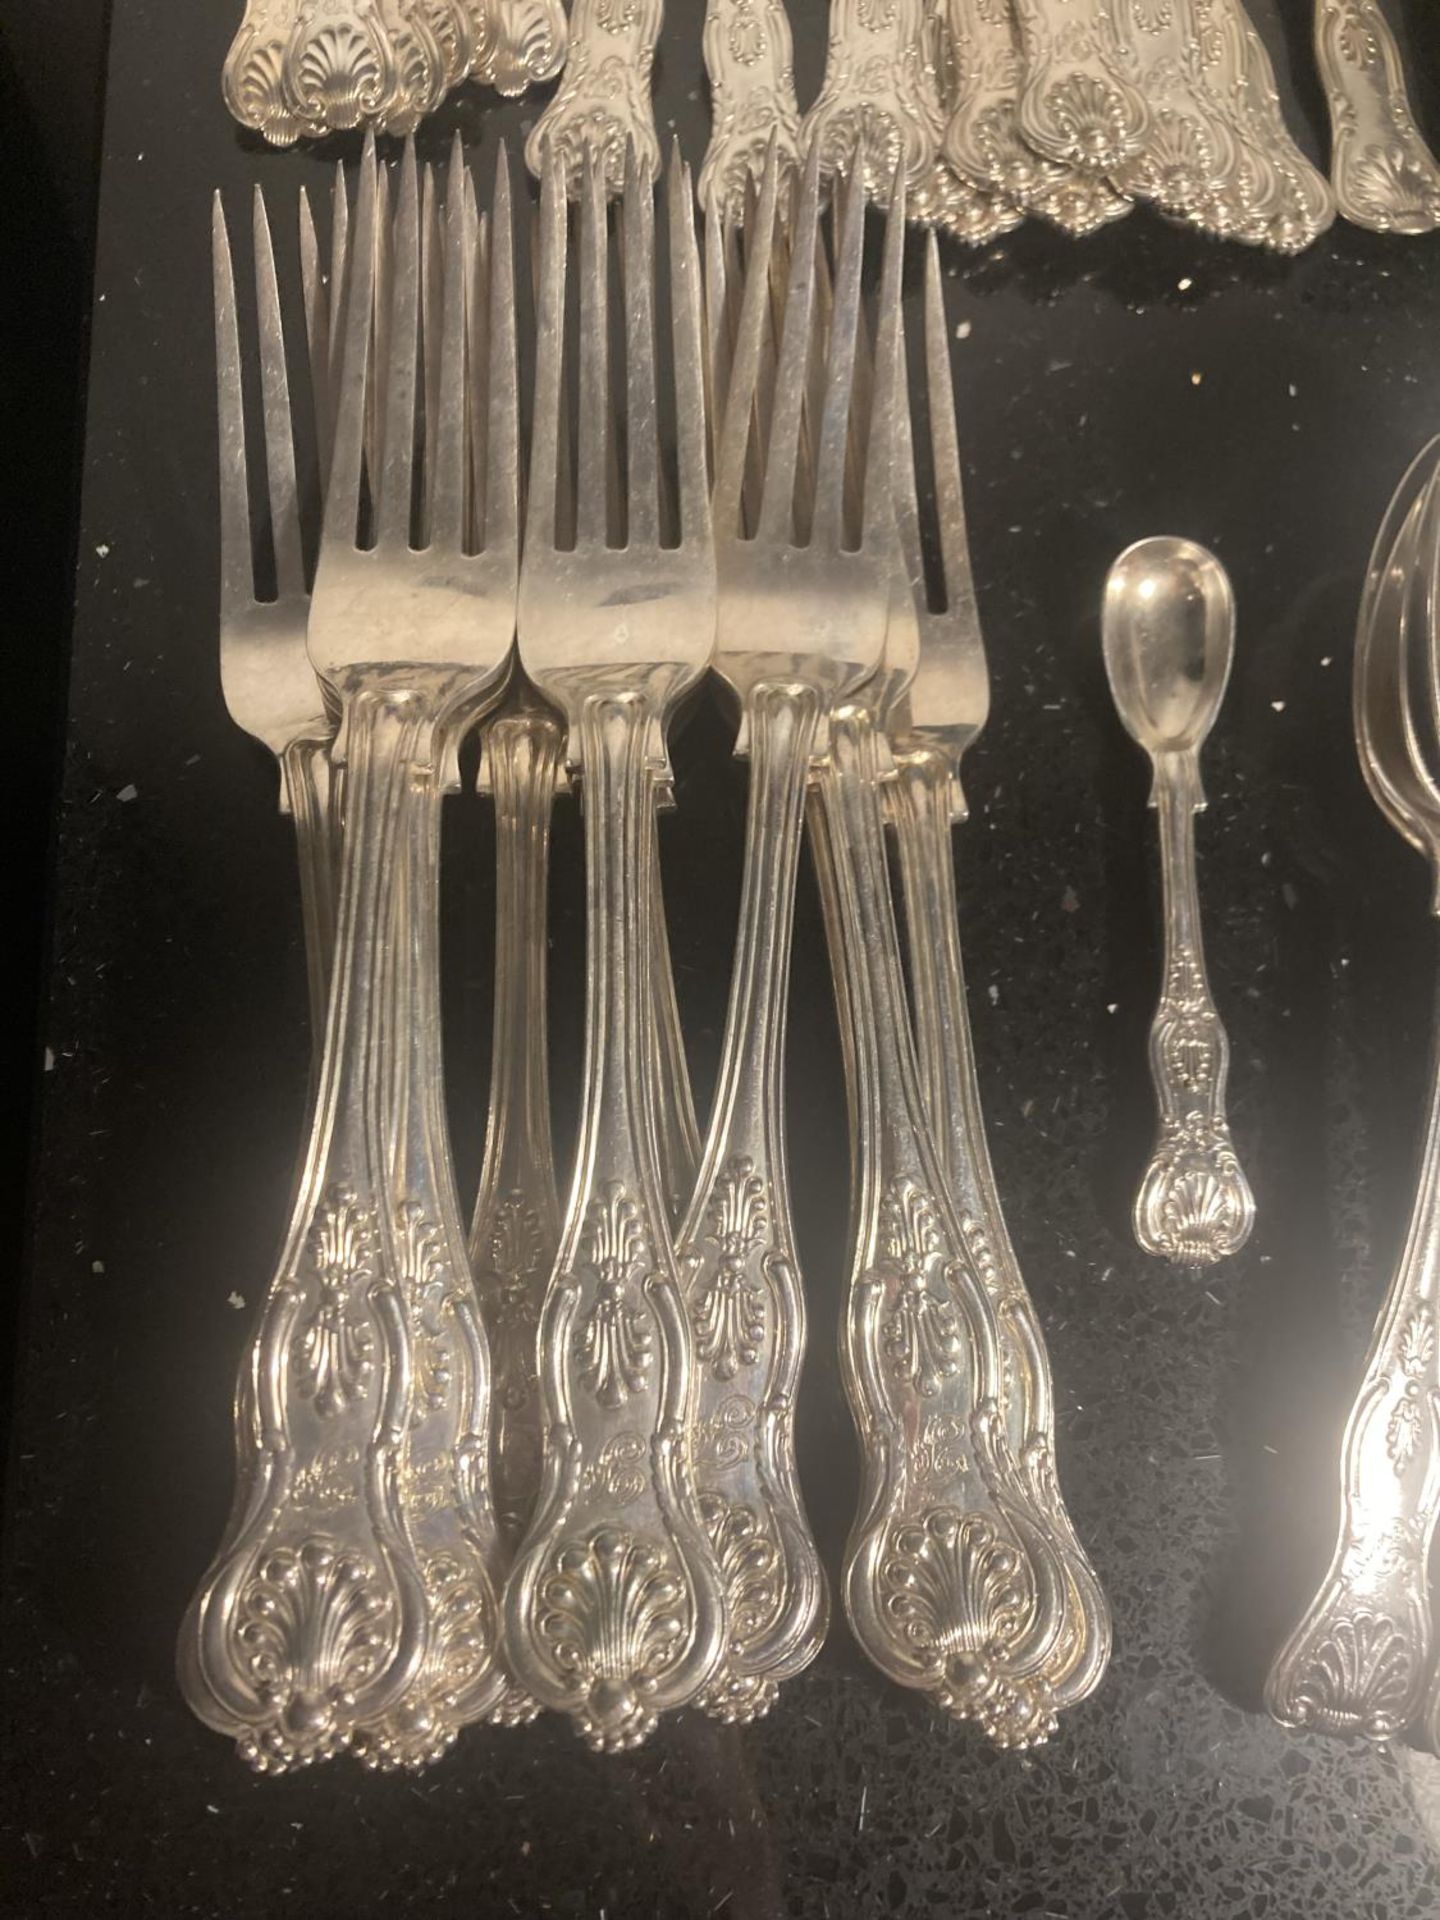 A LARGE QUANTITY OF HALLMARKED SILVER FLATWARE TO INCLUDE FORKS, SPOONS ETC GROSS WEIGHT 2976 GRAMS - Image 4 of 6